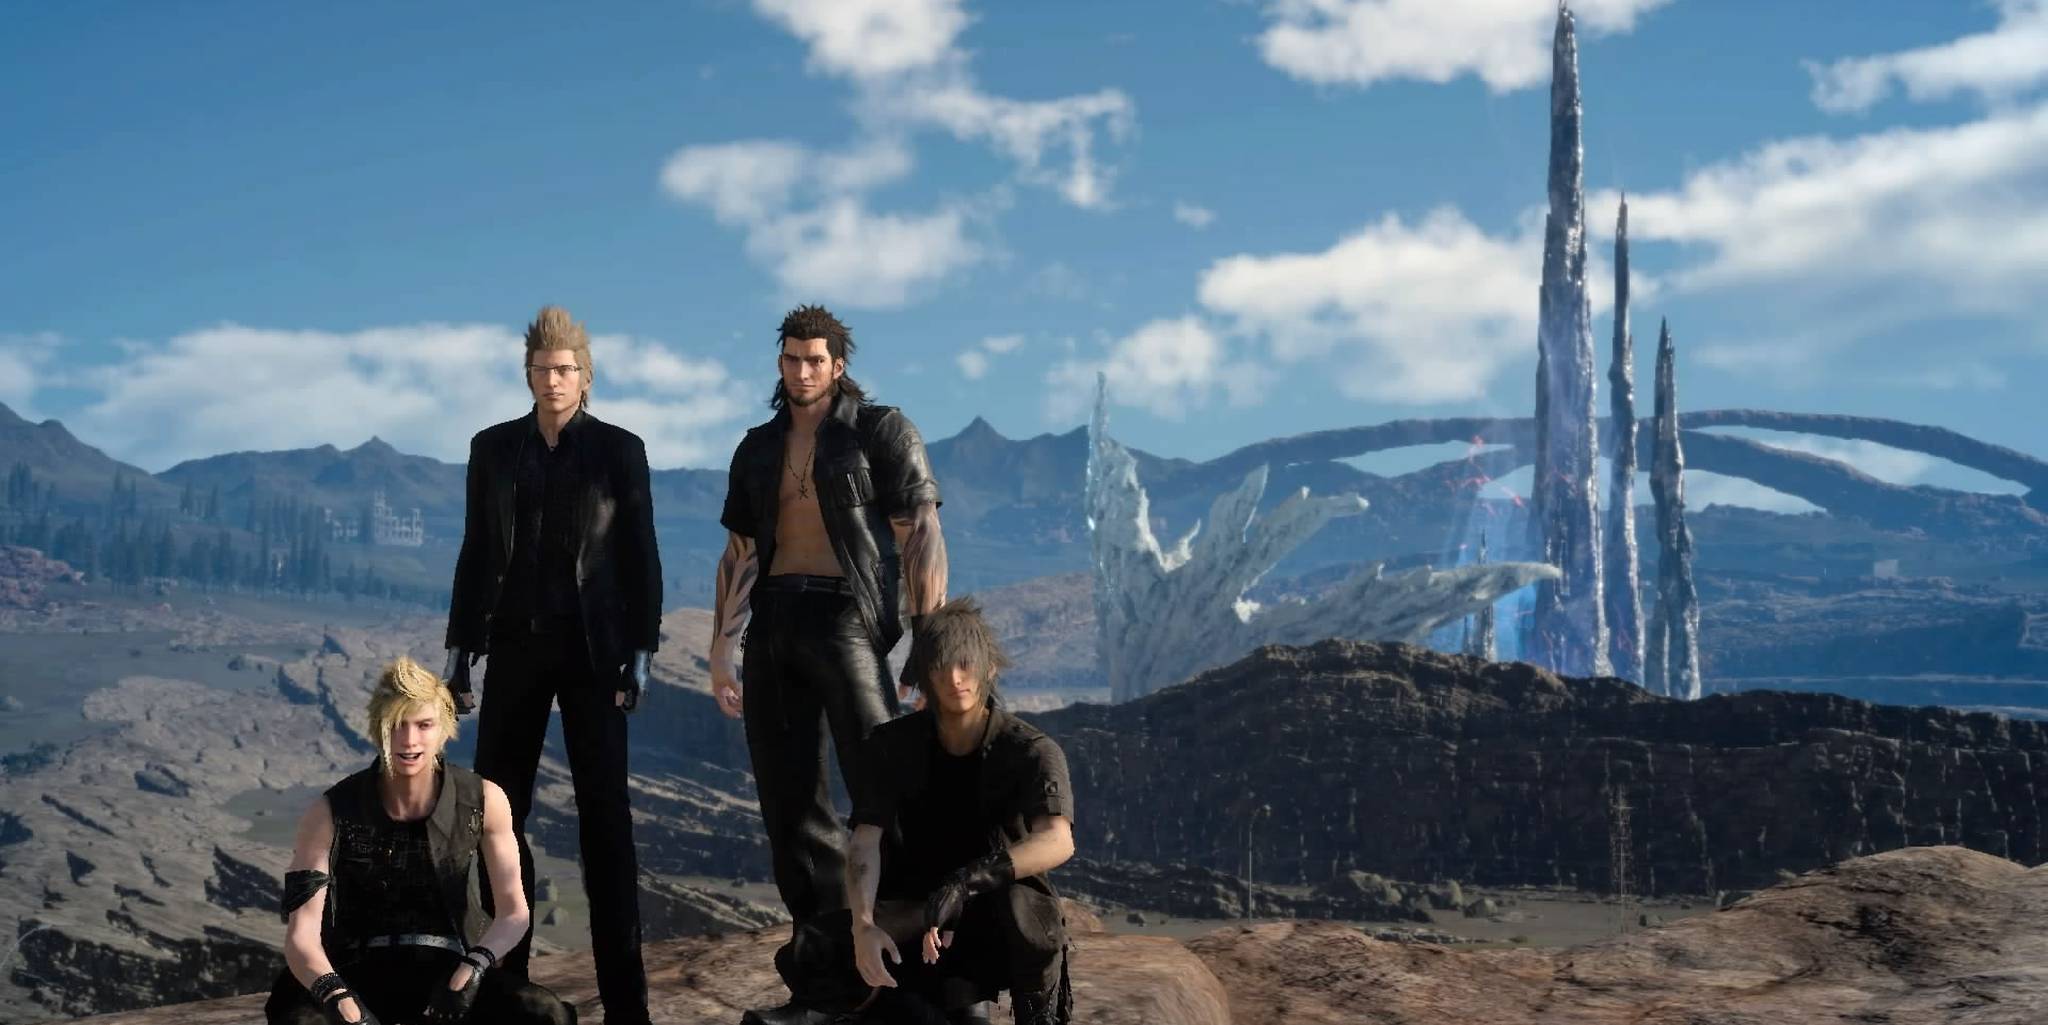 BROTHERHOOD FINAL FANTASY XV Episode 1: Before the Storm